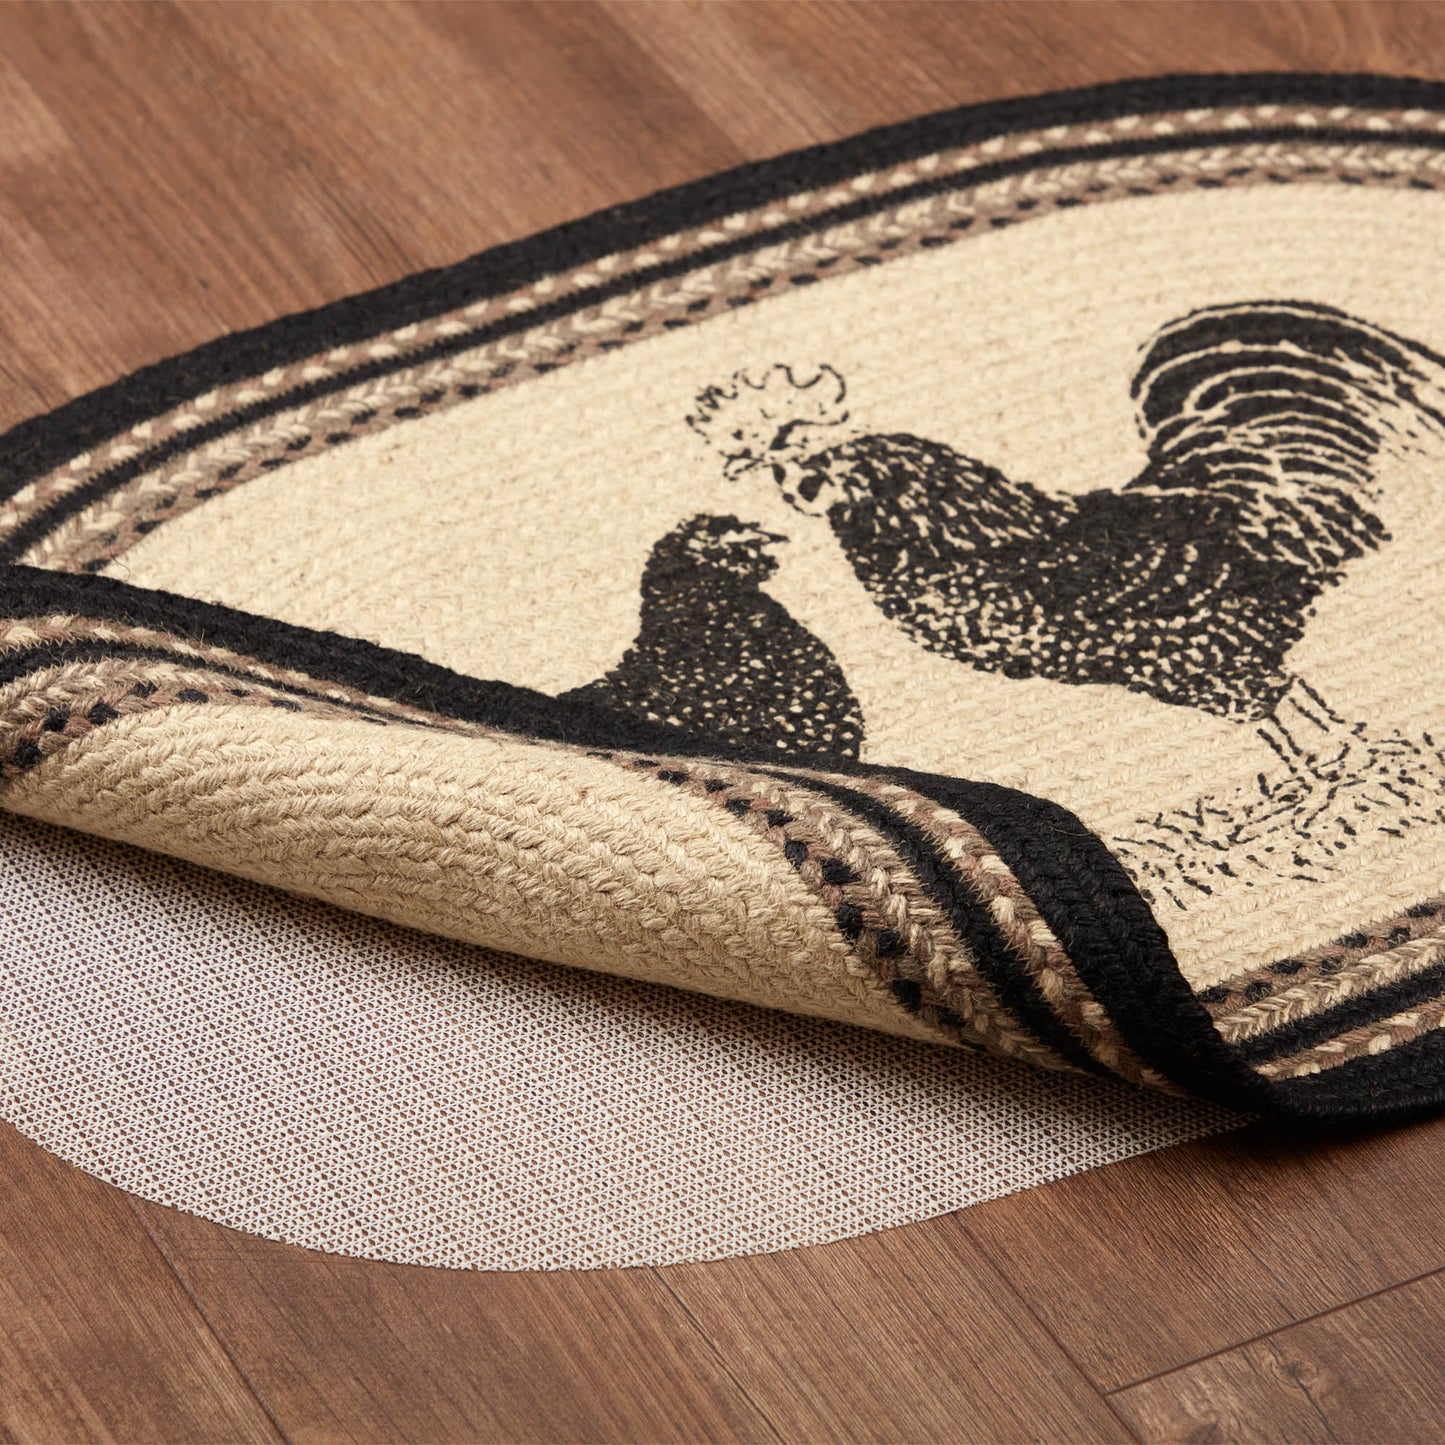 69391-Sawyer-Mill-Charcoal-Poultry-Jute-Rug-Oval-w-Pad-20x30-image-8